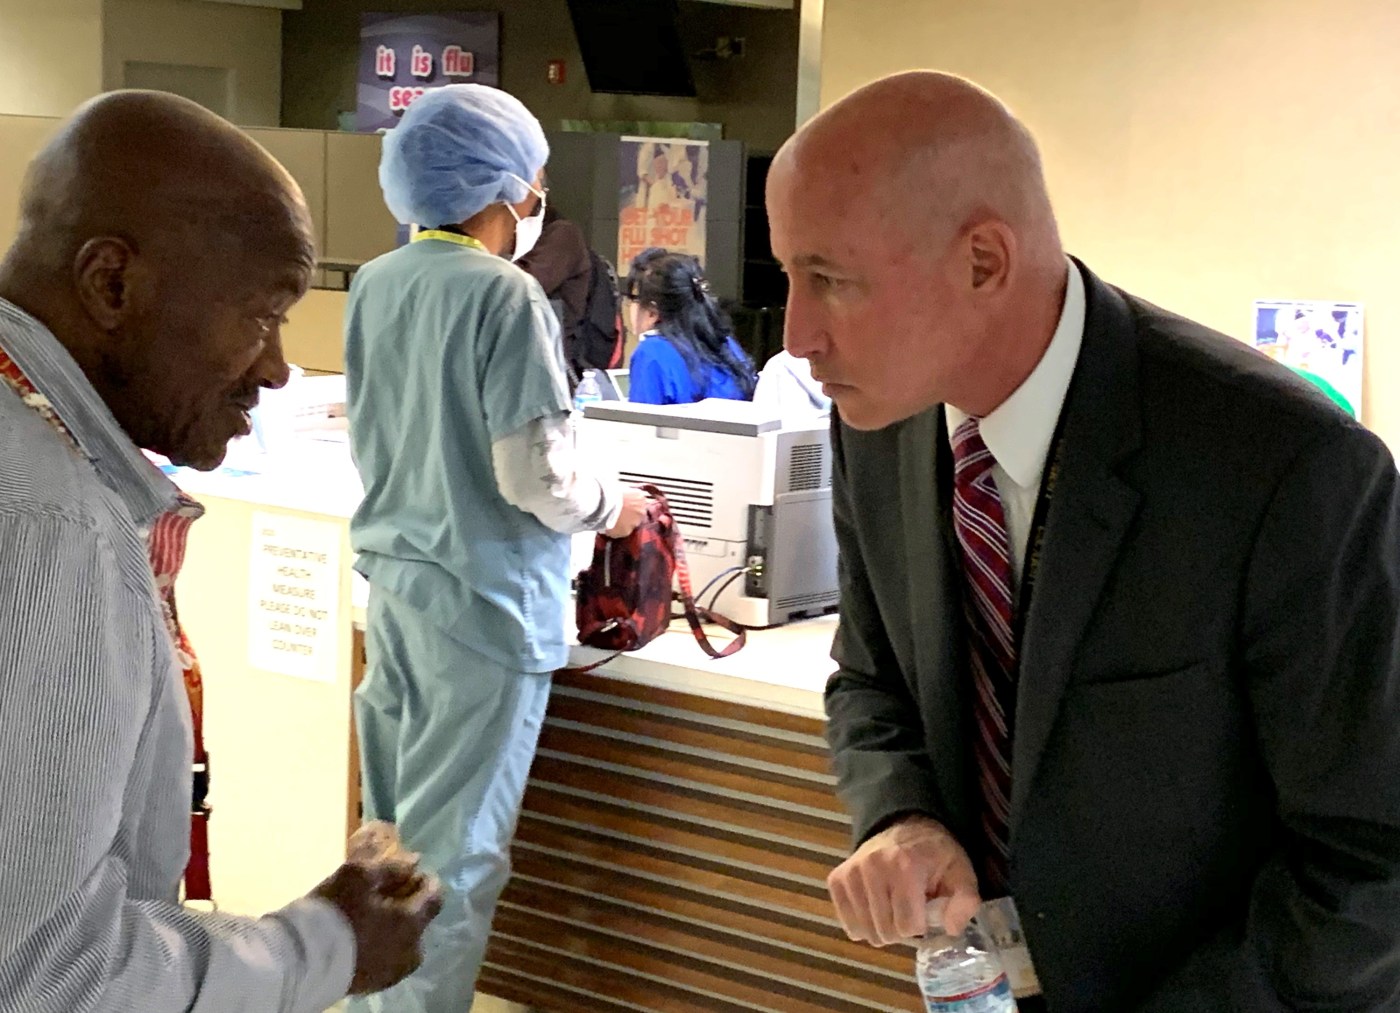 Dr. Steve Braverman (right), director of the VA Greater Los Angeles Healthcare System, speaks with Marine Veteran Jerry Harris about his health care needs.